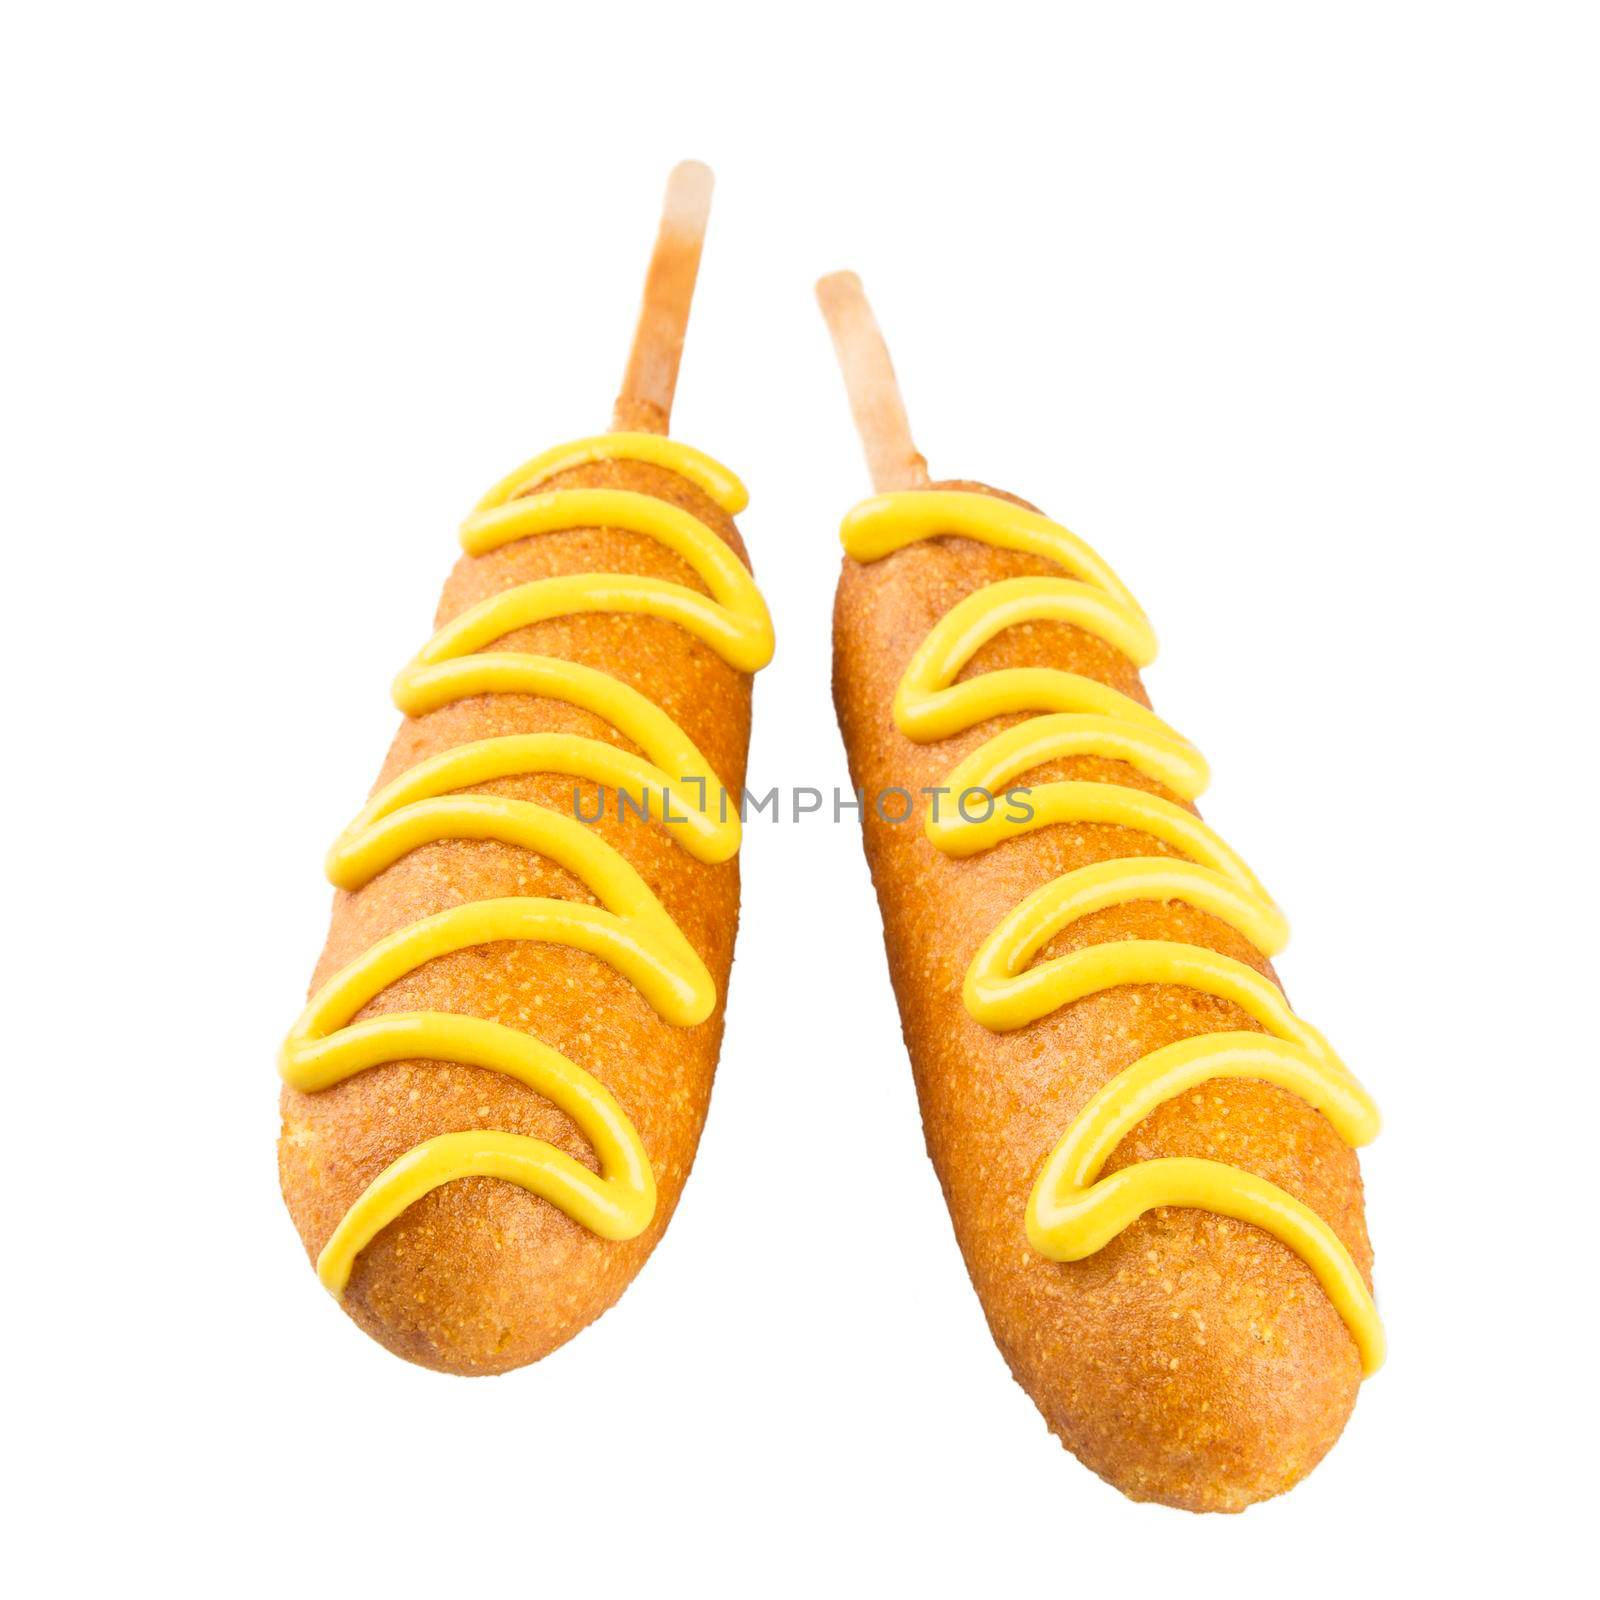 Two corn dogs isolated on a white background topped with mustard